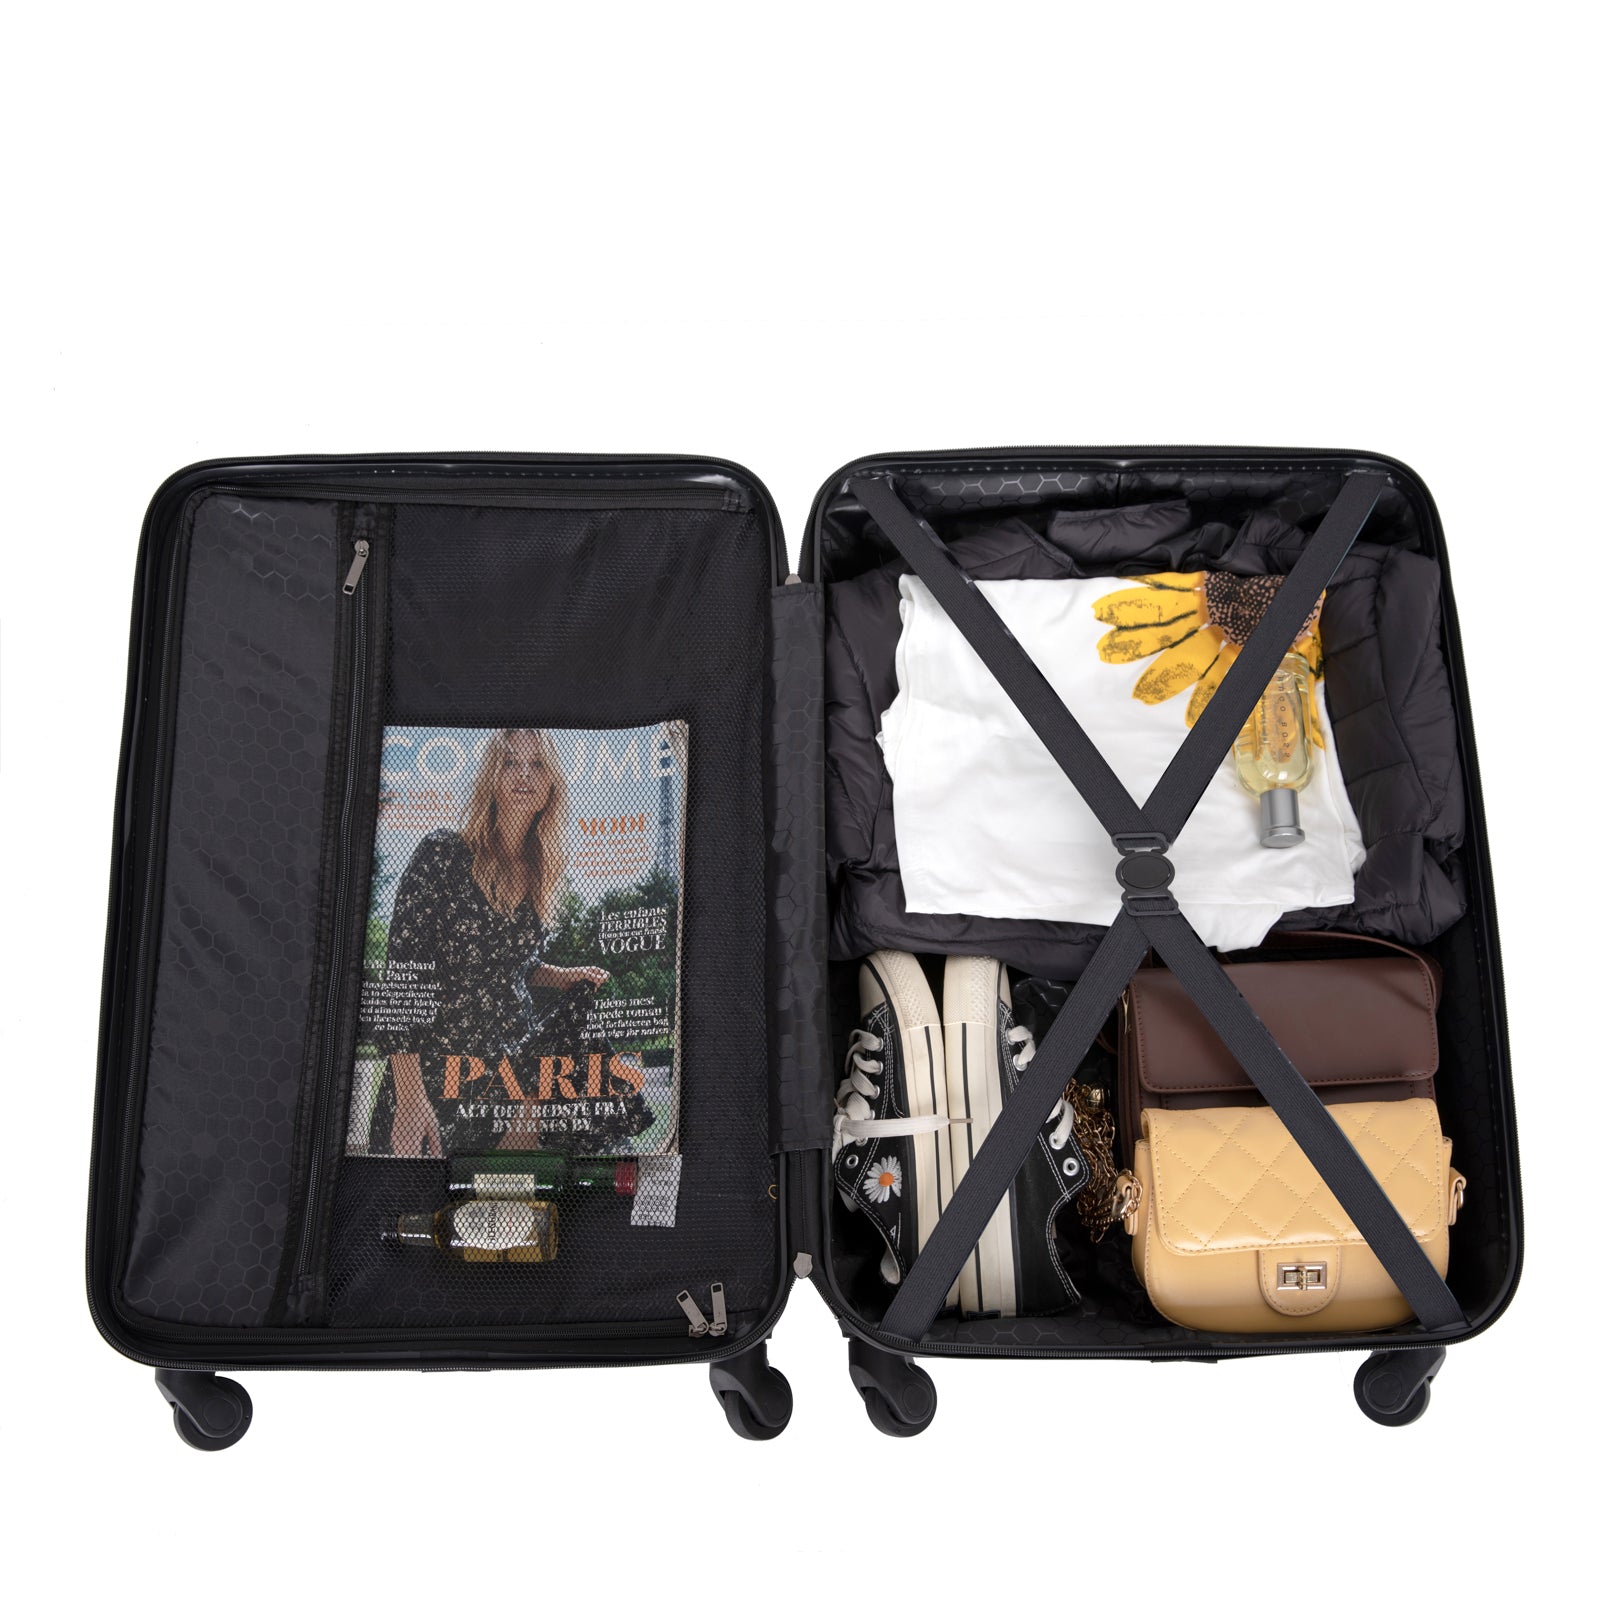 3 Piece Luggage Sets ABS Lightweight Suitcase with Two black-abs